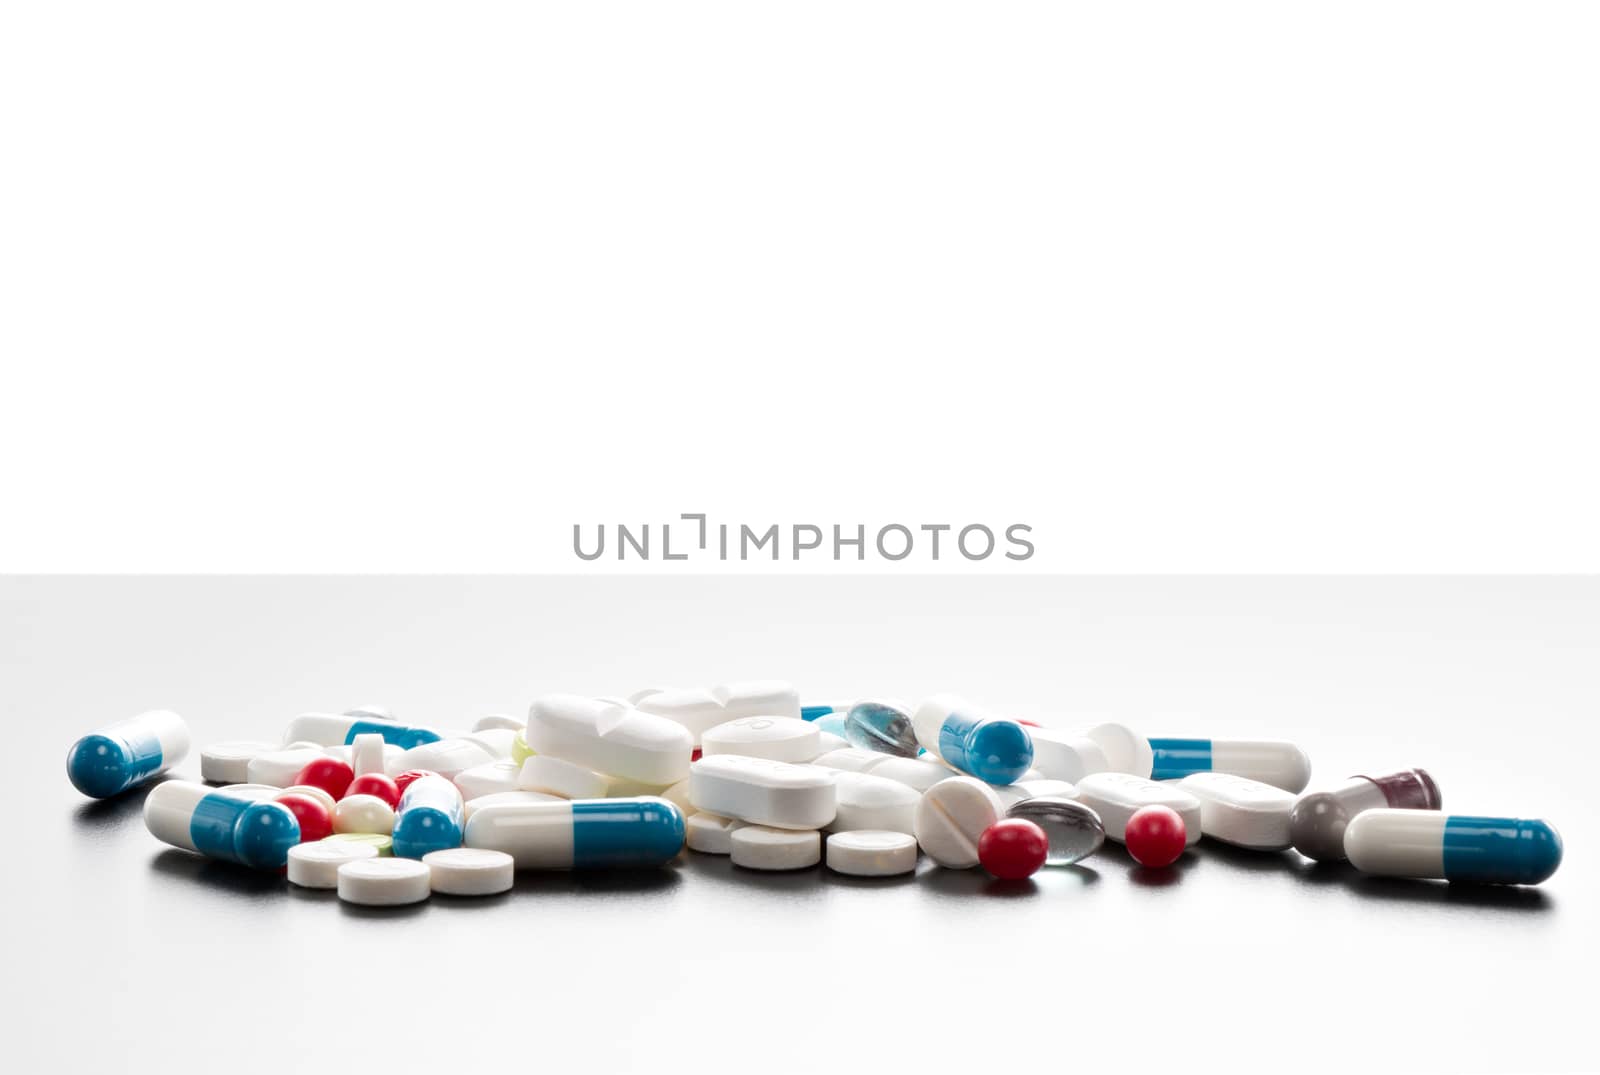 Many colorful tablets on a table, isolated